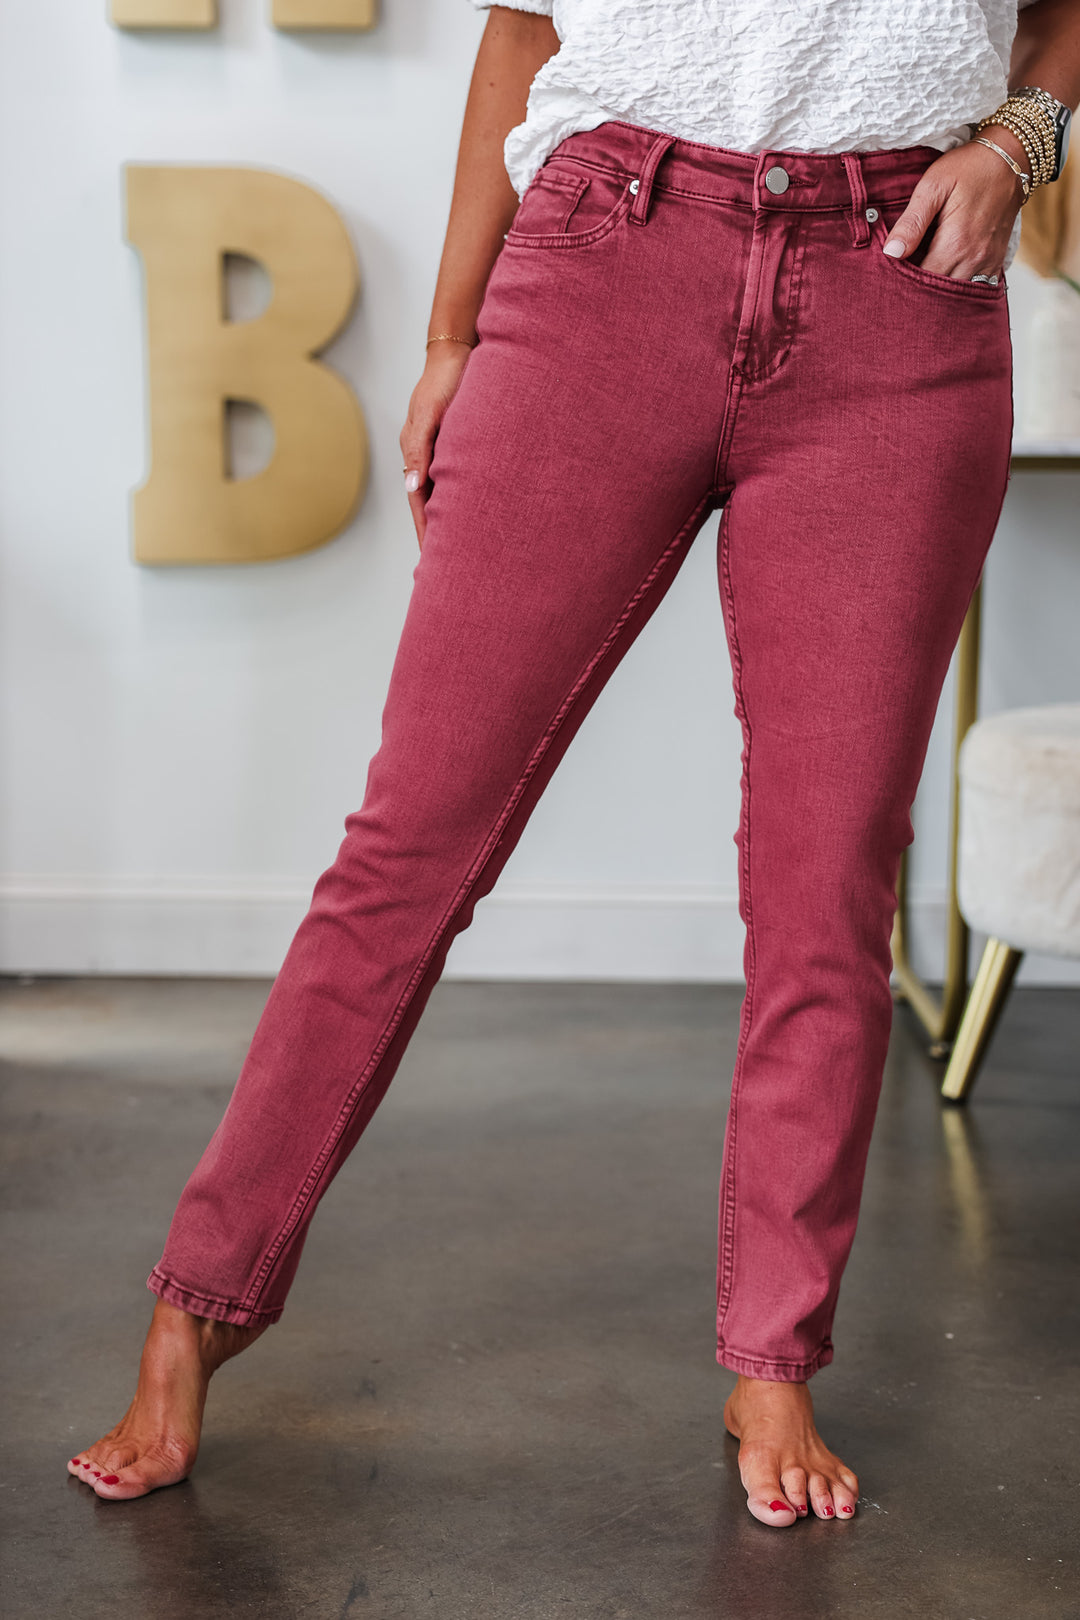 A woman standing in a shop wearing ruby colored jeans with a medium rise and straight leg.